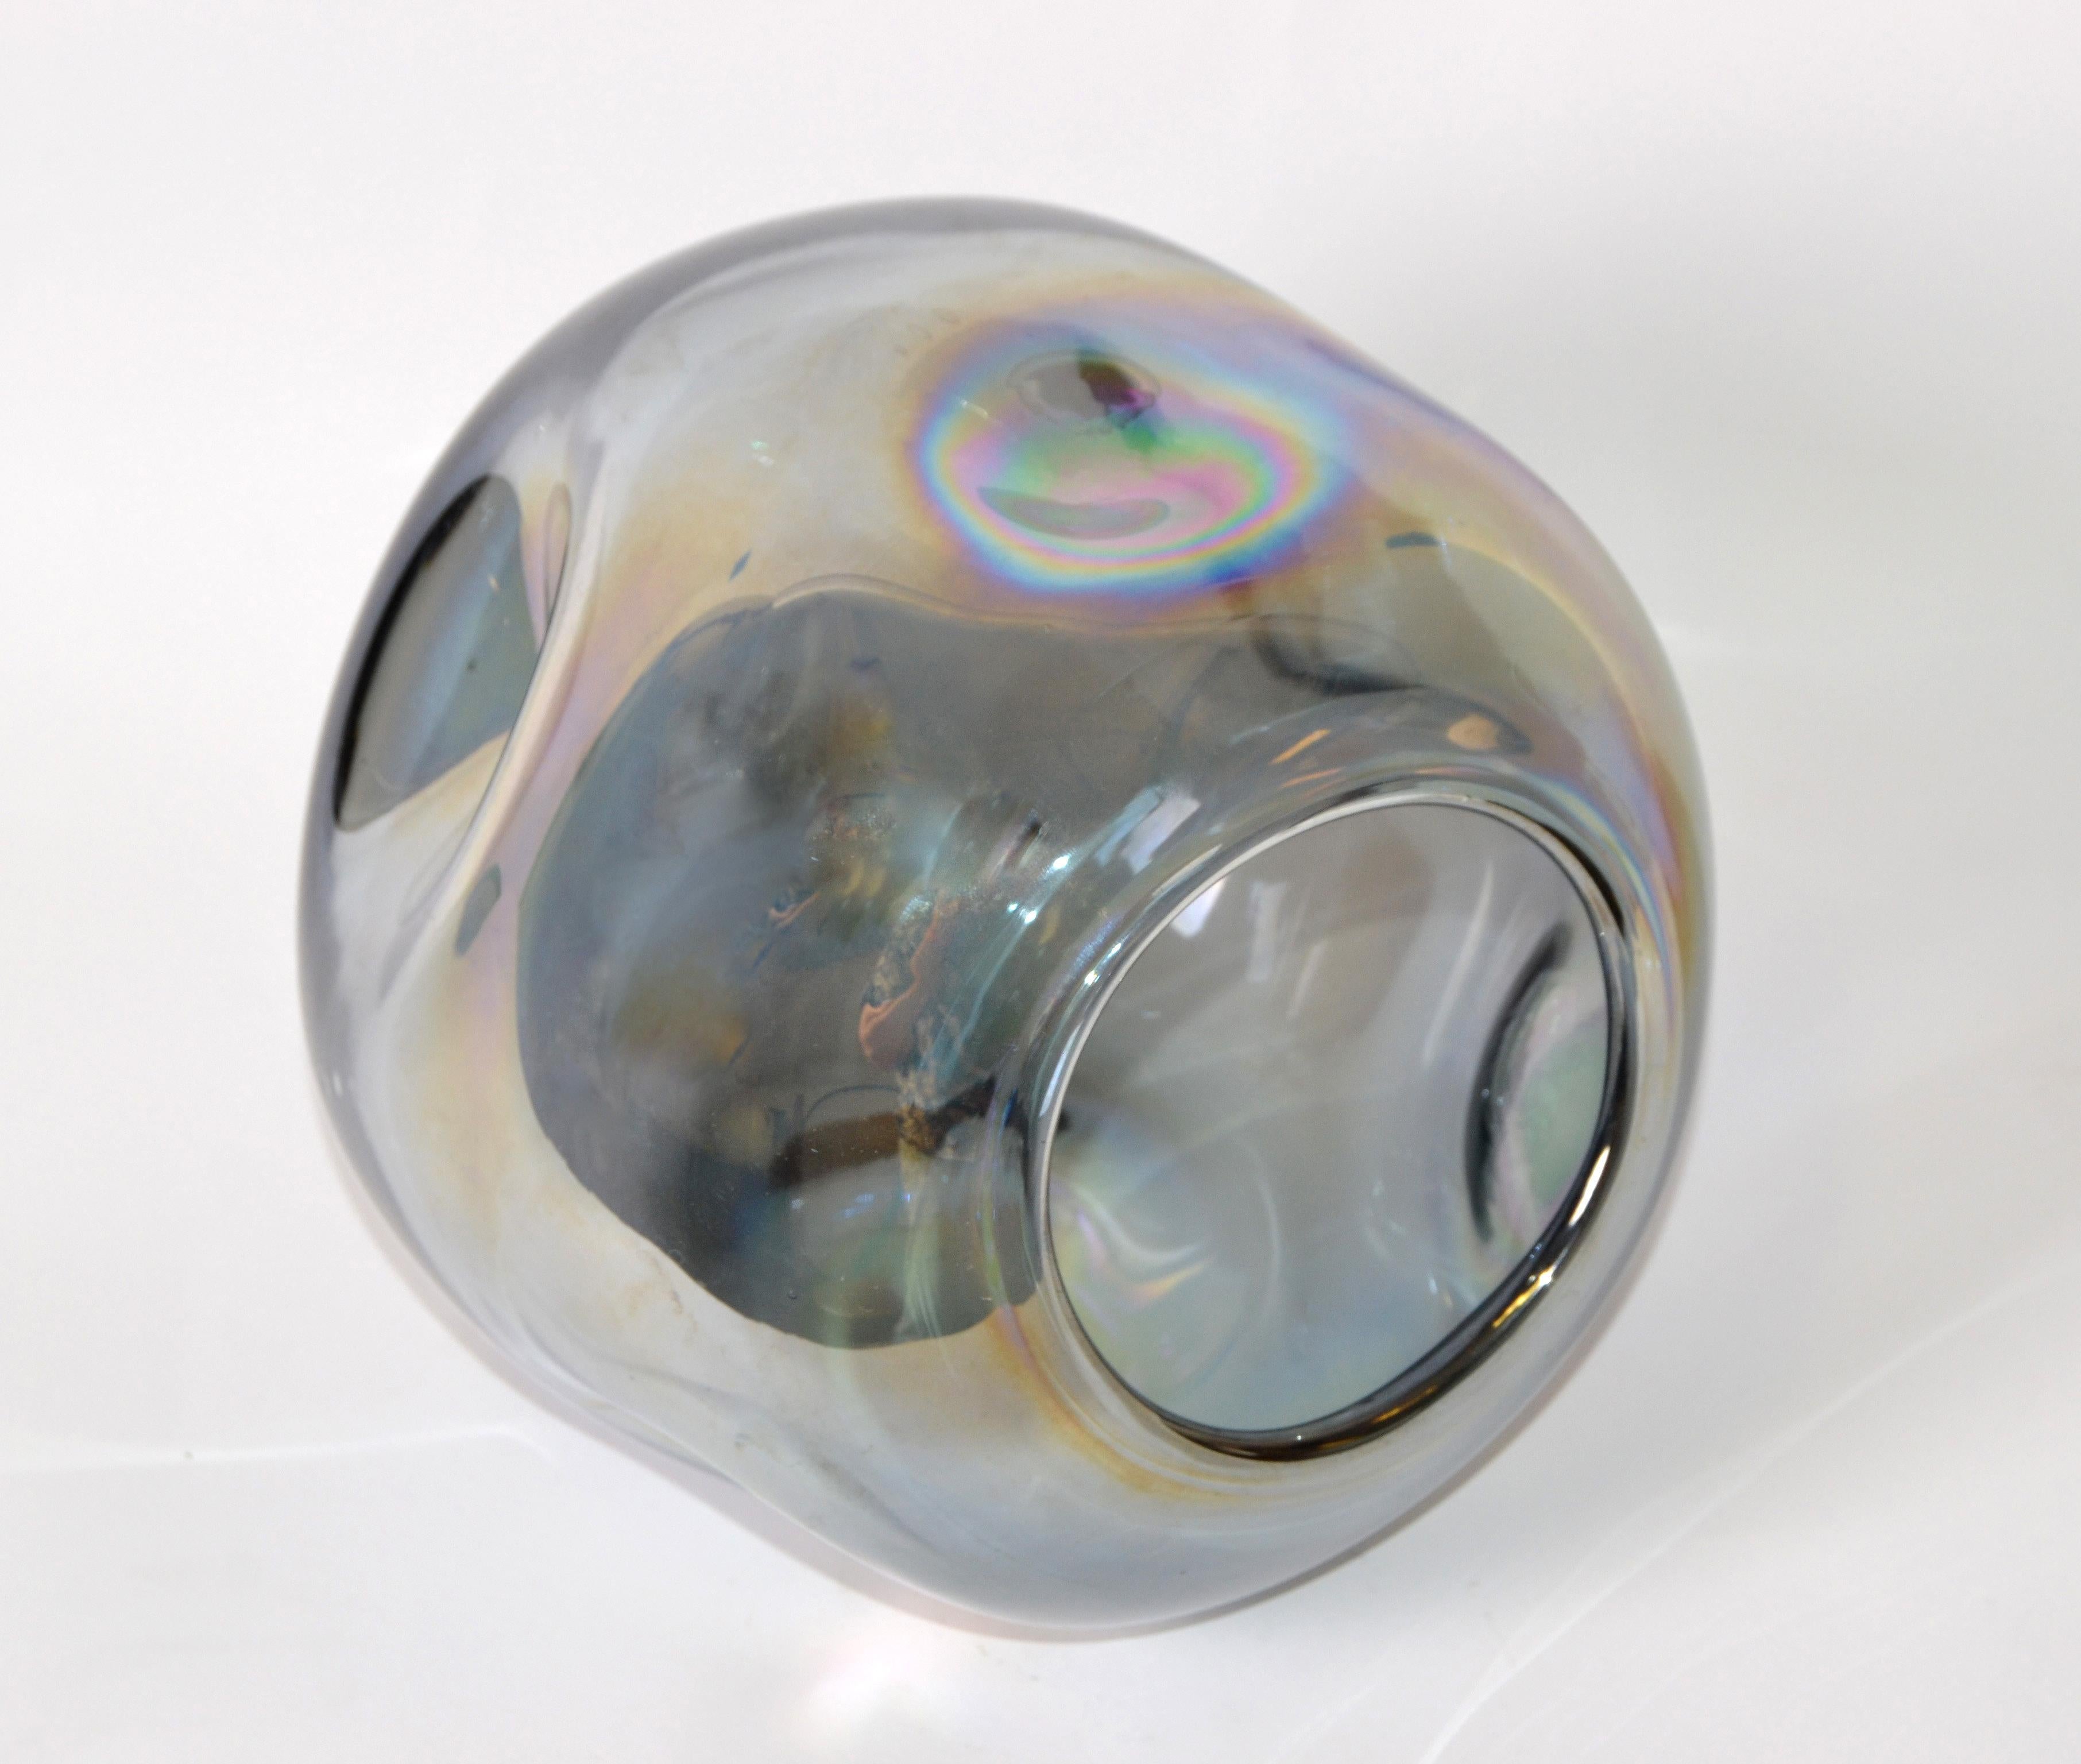 Blown Smoked Glass Vase Mid-Century Modern with Mirror Coating & Round Indents In Good Condition For Sale In Miami, FL